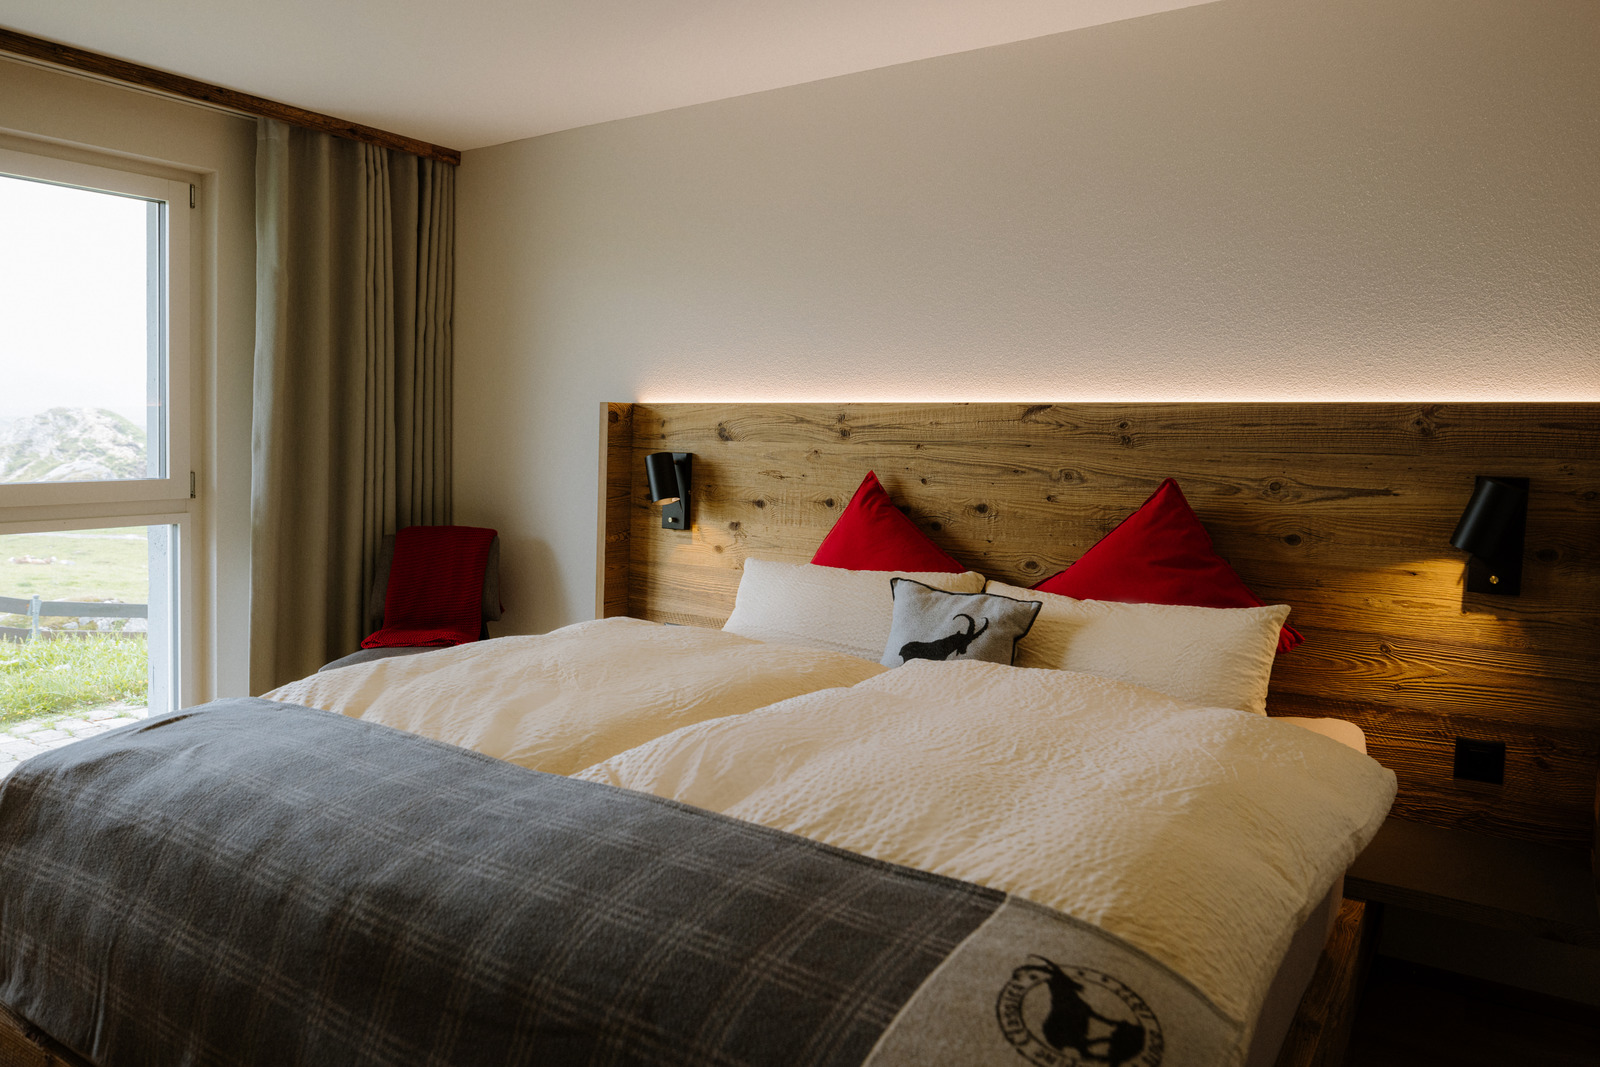 Overnight stay at Berghotel Engstligenalp with 3-course dinner